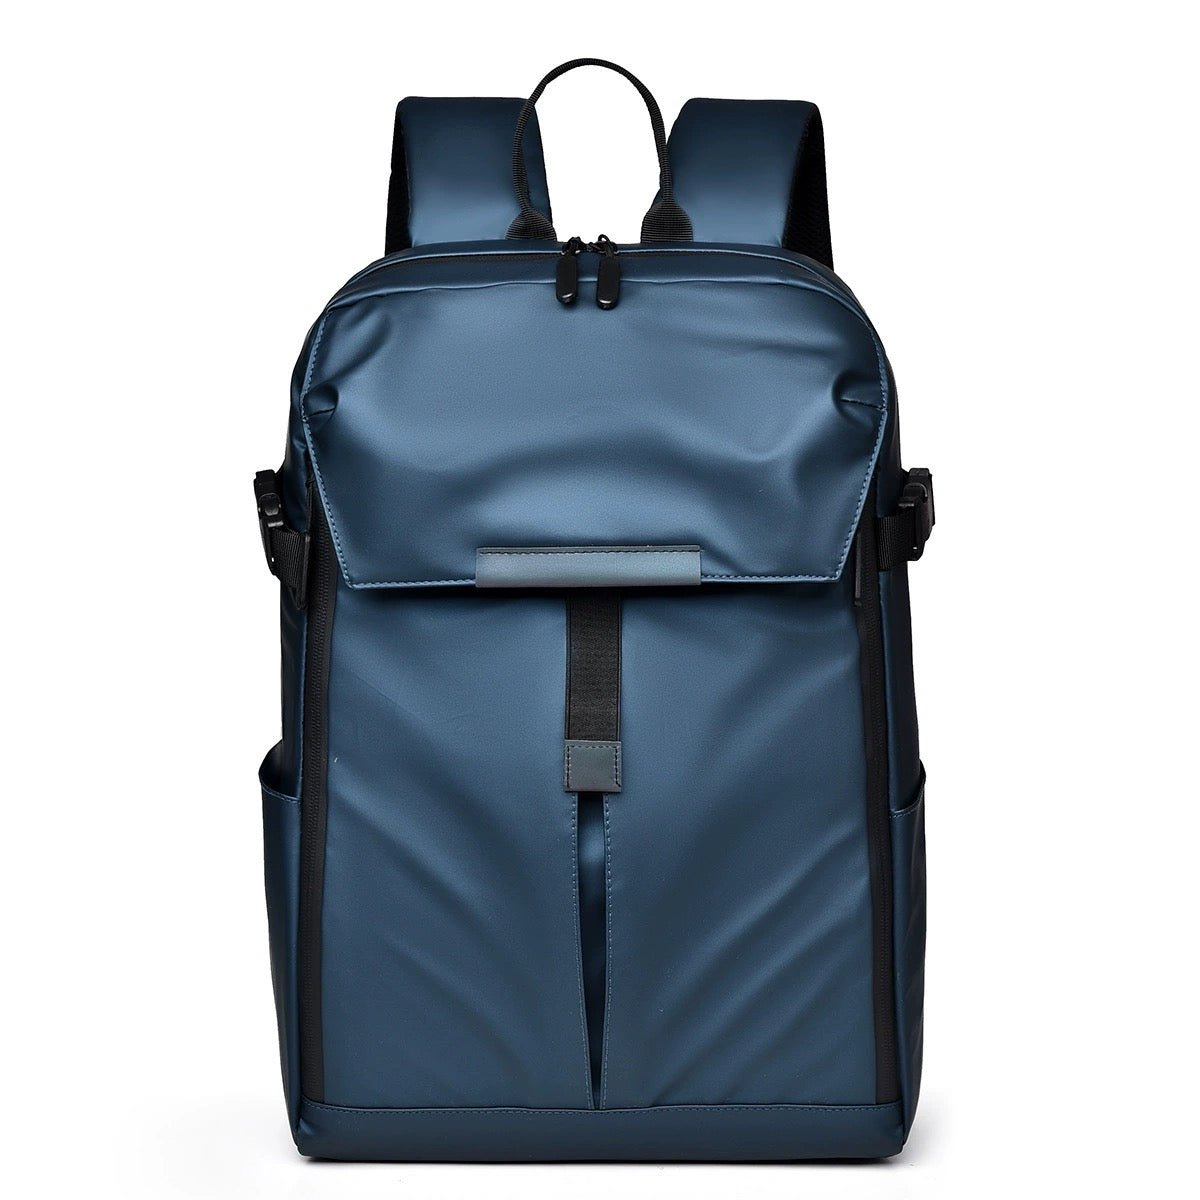 BeeCool Overall Travel Backpack